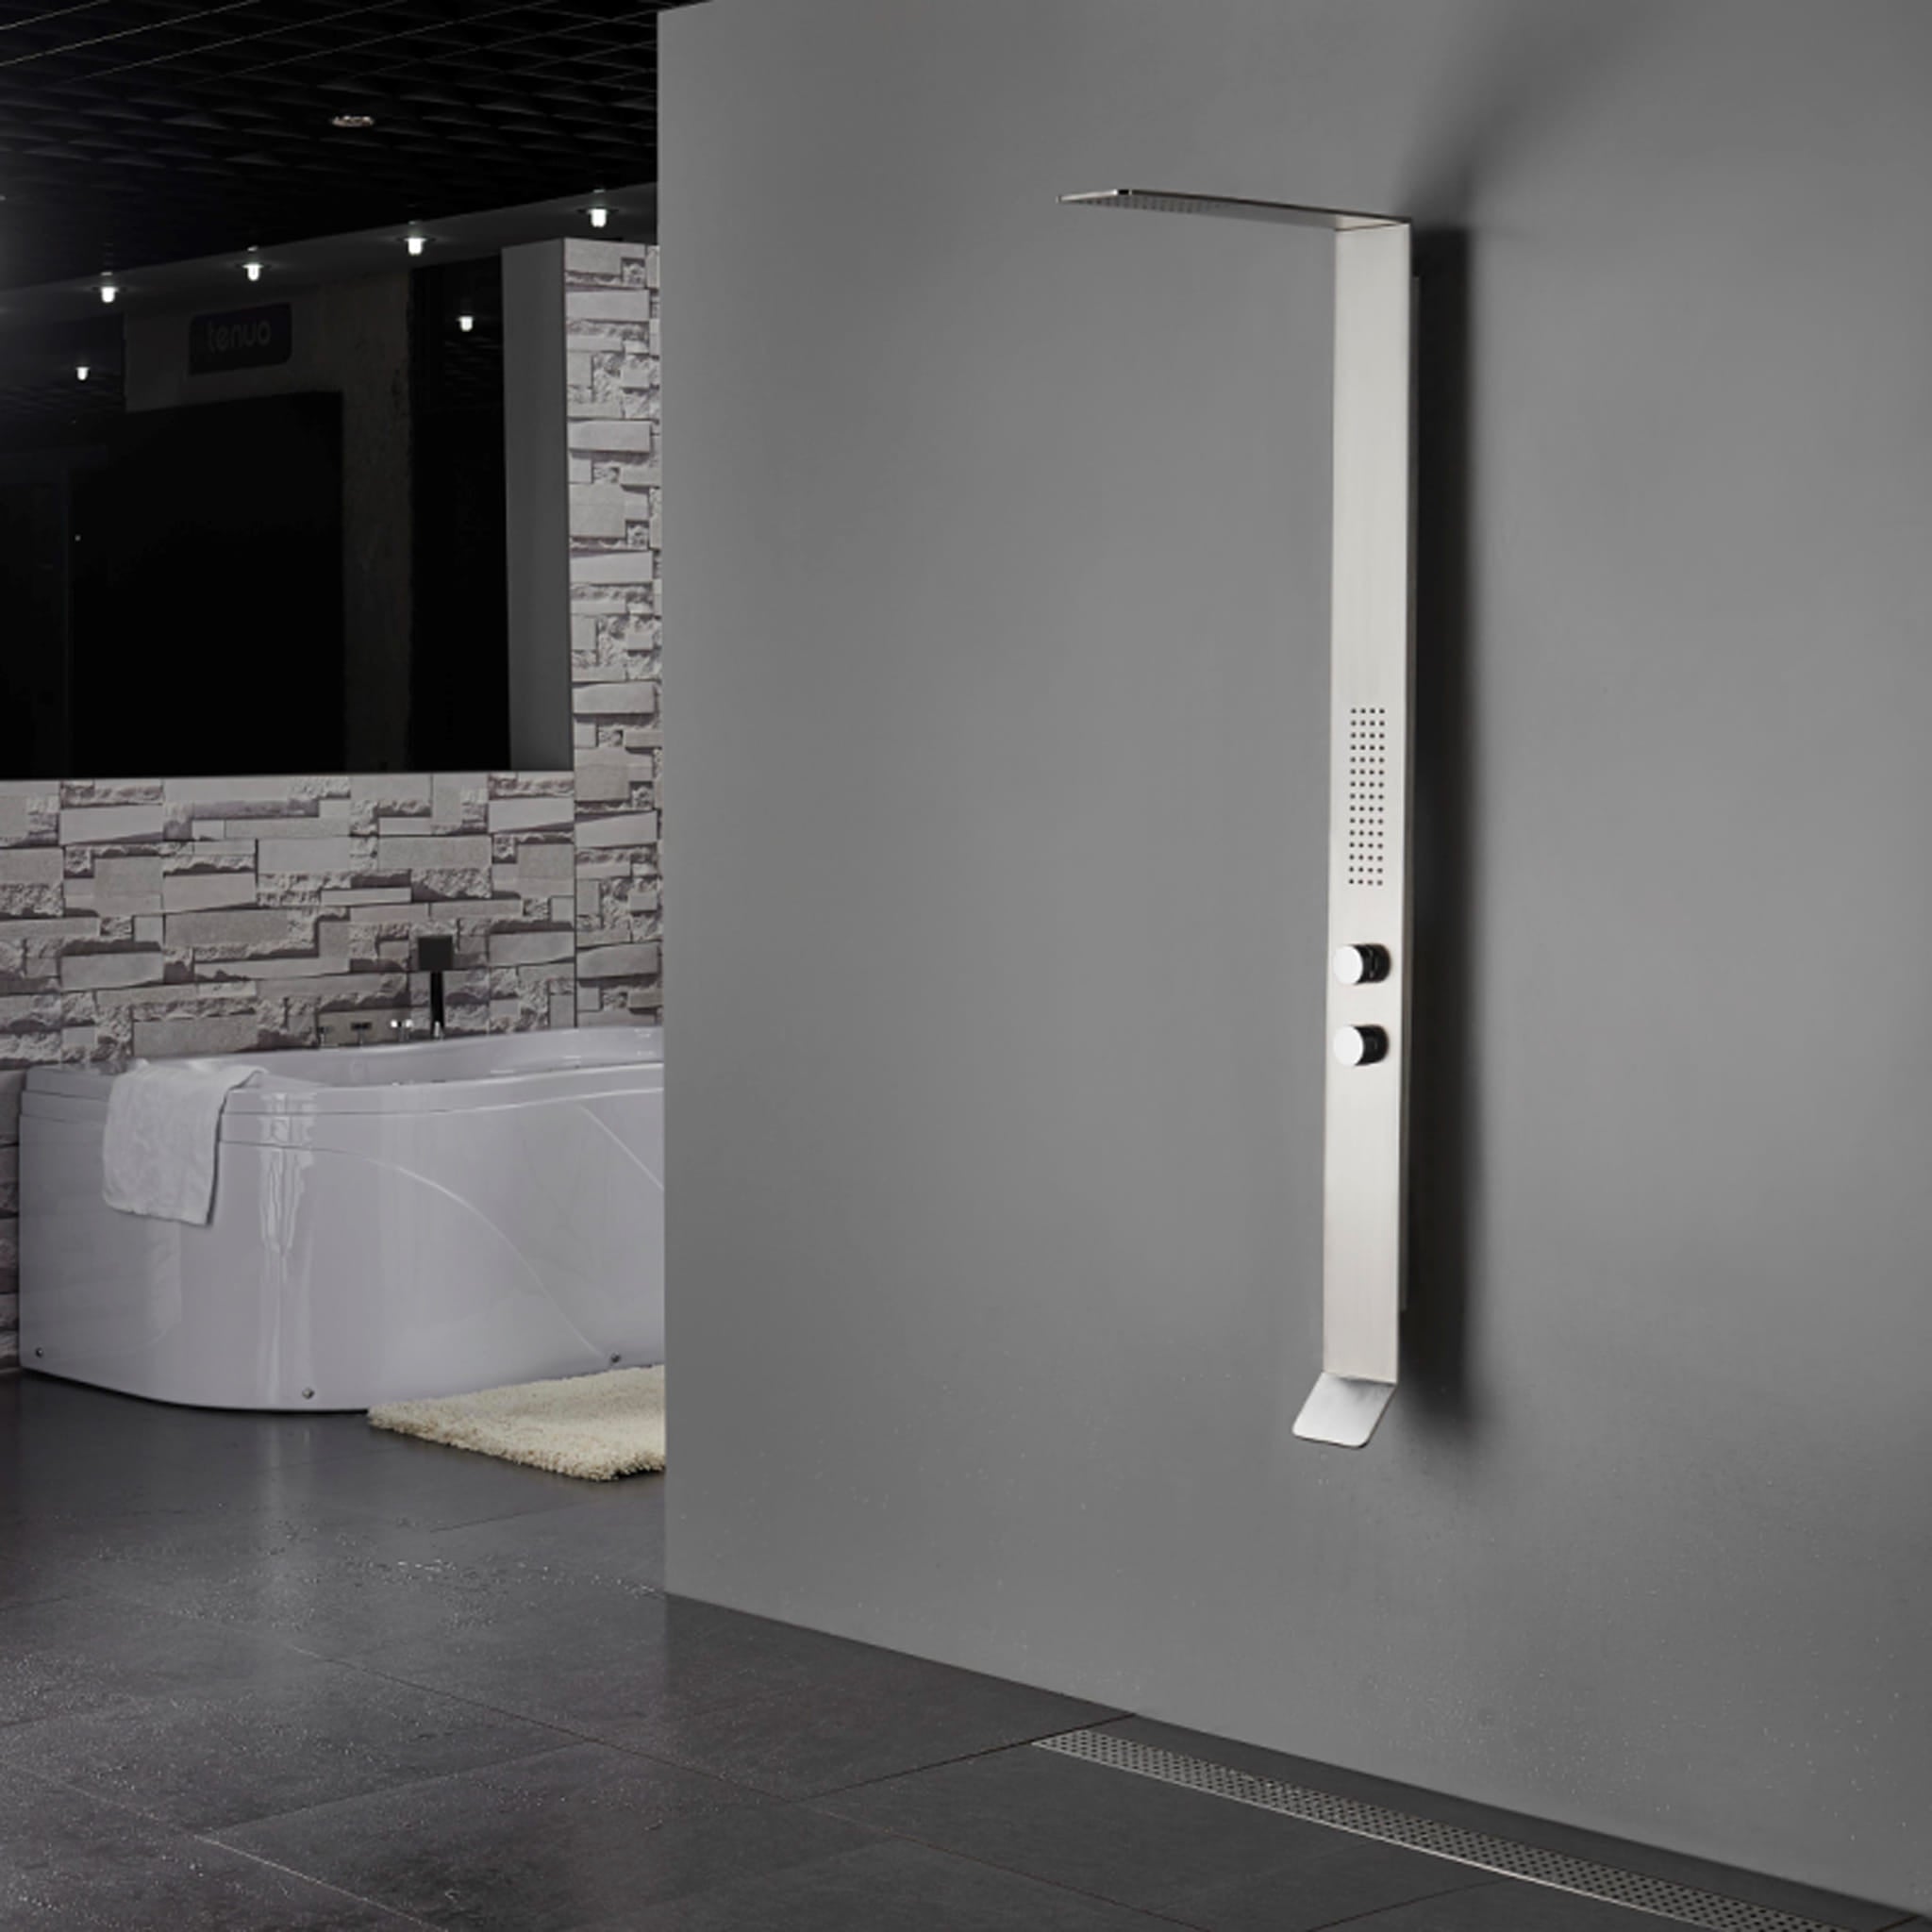 Aquamoon COSMOS  Stainless Steel  Recessed Bathroom Shower Panel 63 x 9.75 with  Rainfall Shower Head + Handheld Shower + Massage Body Jets